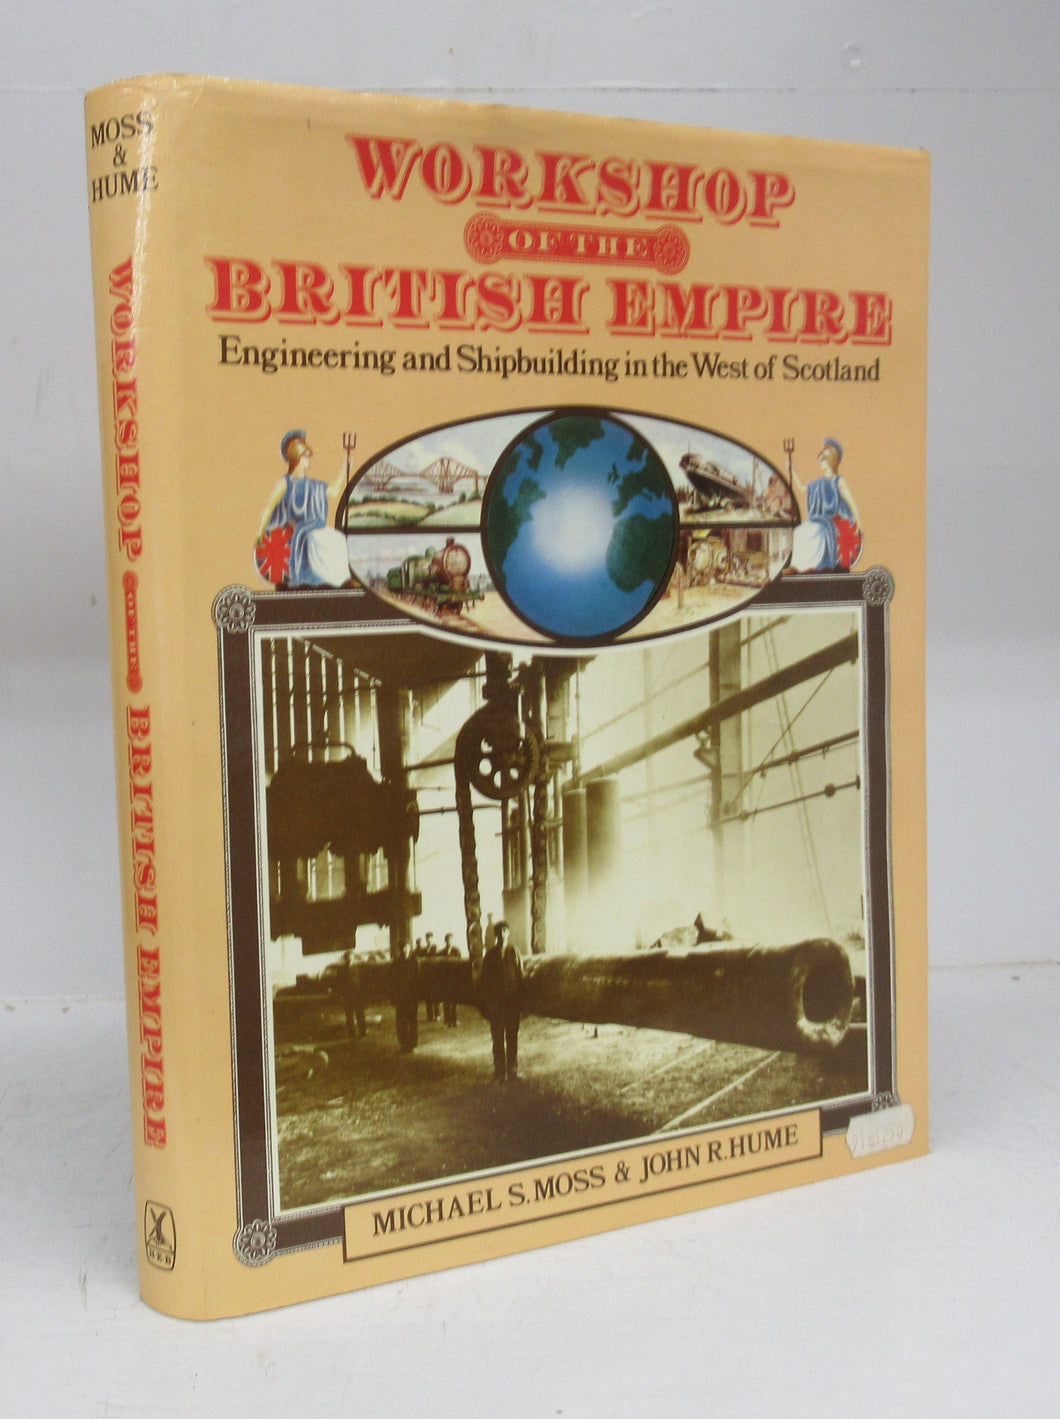 Workshop of the British Empire: Engineering and Shipbuilding in the West of Scotland